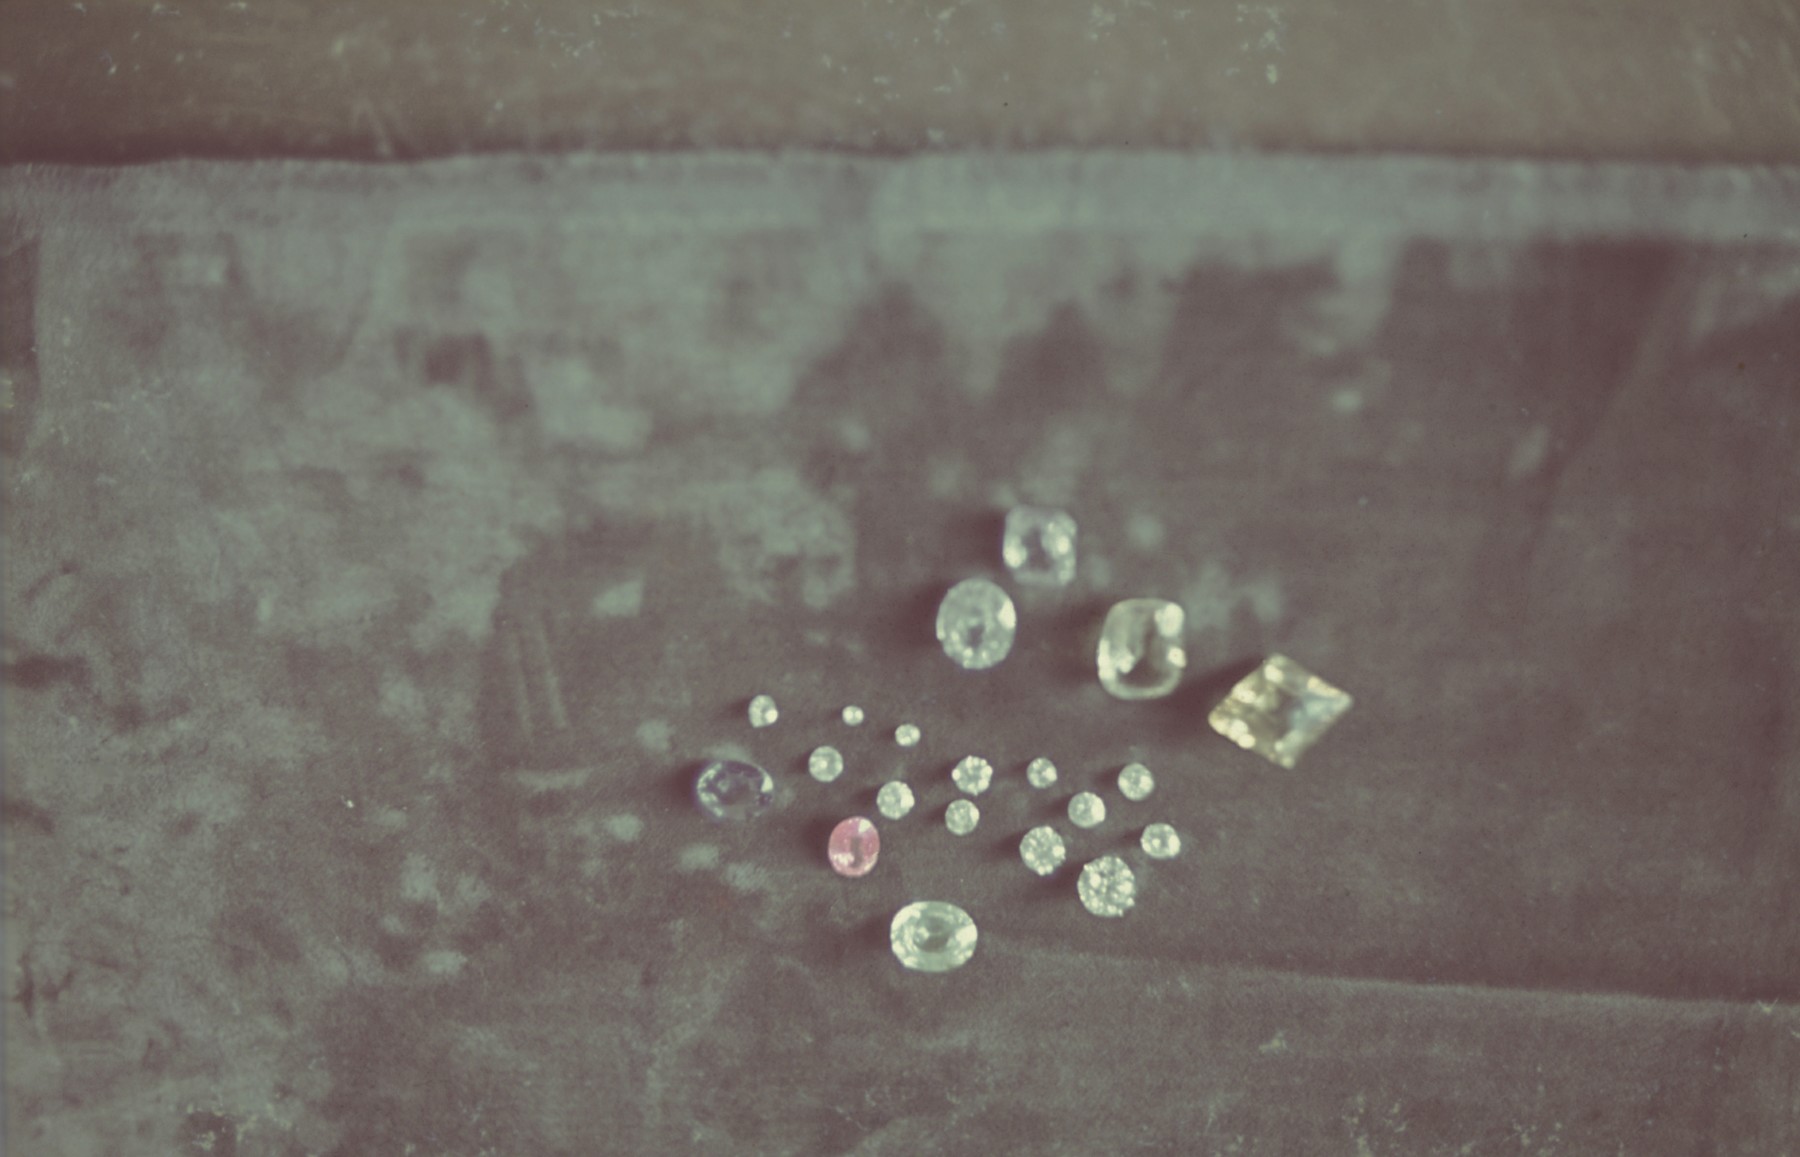 Confiscated jewels.